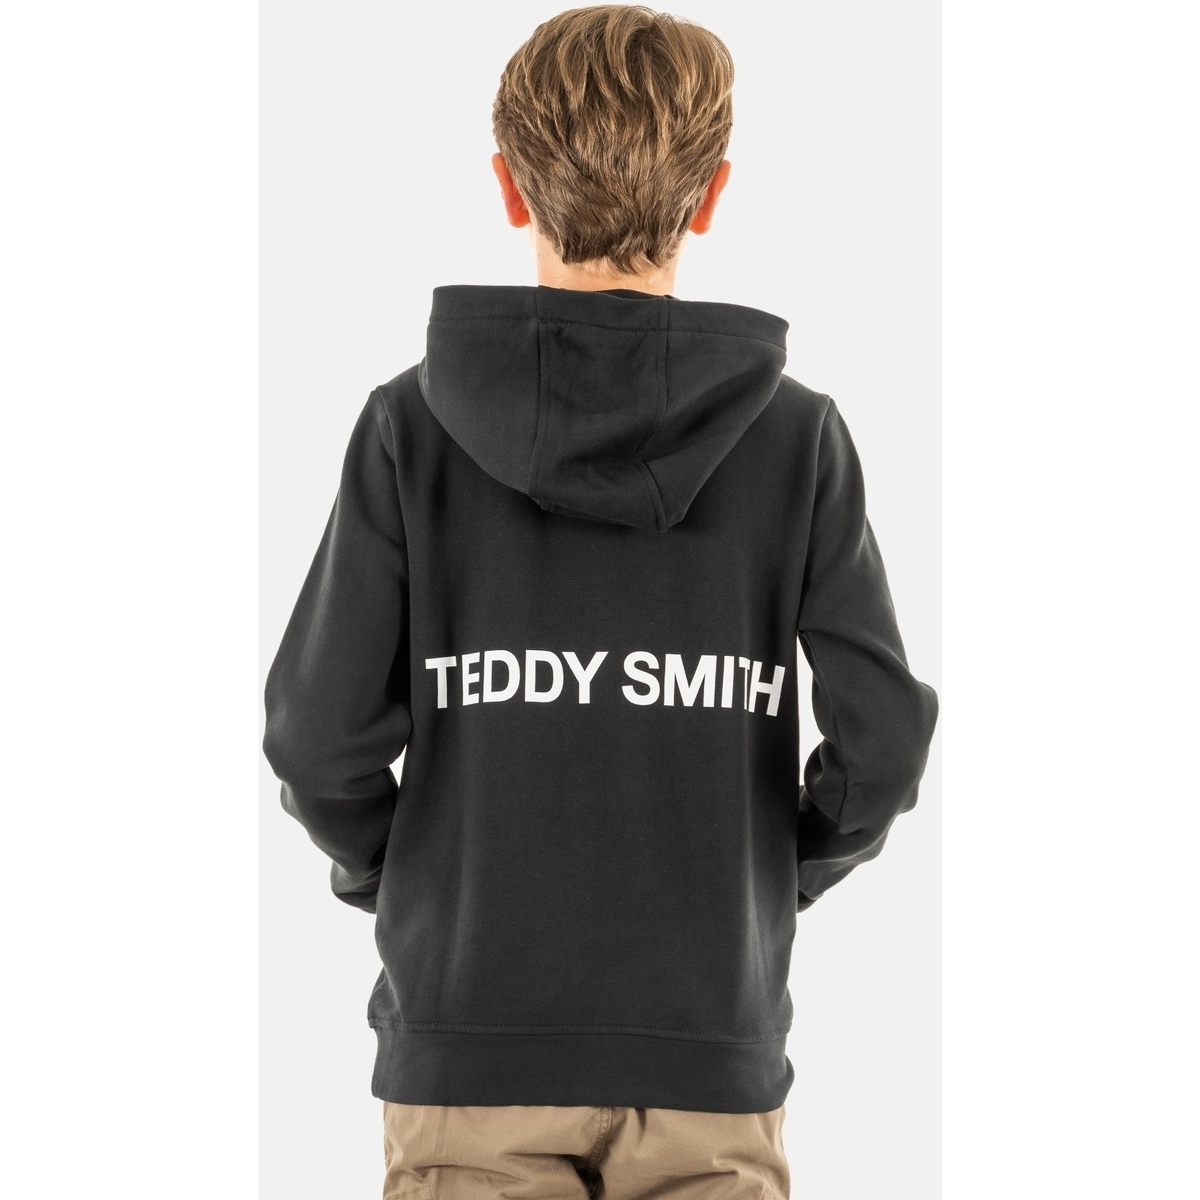 Teddy Smith Gris 60807158d juYxW0DT